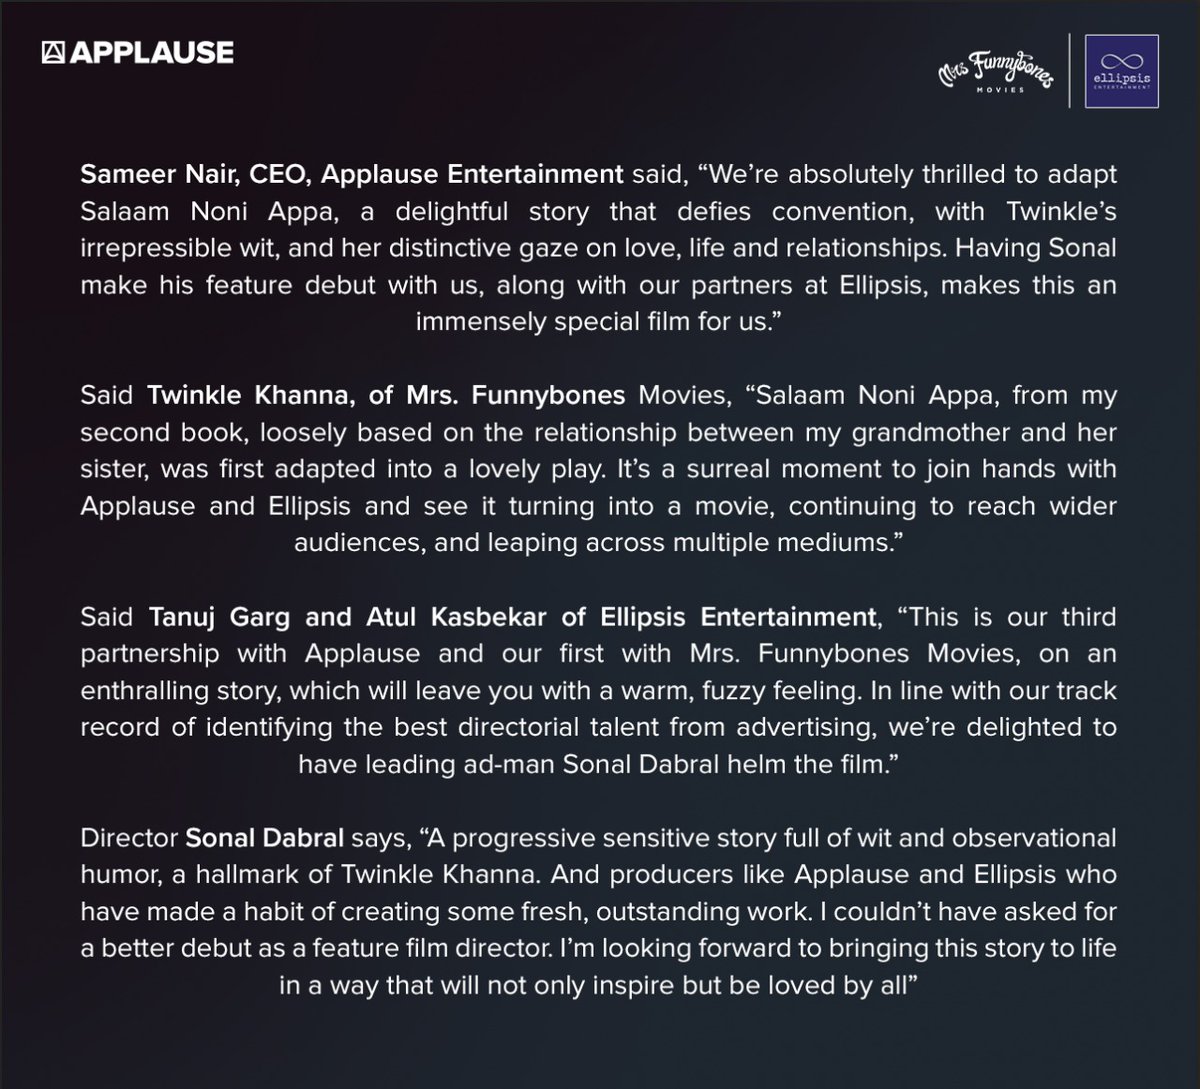 Delighted to partner with @ApplauseSocial and @mrsfunnybones for a heartwarming film based on Twinkle Khanna's feted short story, 'Salaam Noni Appa.' To be directed by leading adman @agracadabra. @nairsameer @tanuj_garg @atulkasbekar @prasoon_garg @RanjibMazumder @sunil_chainani